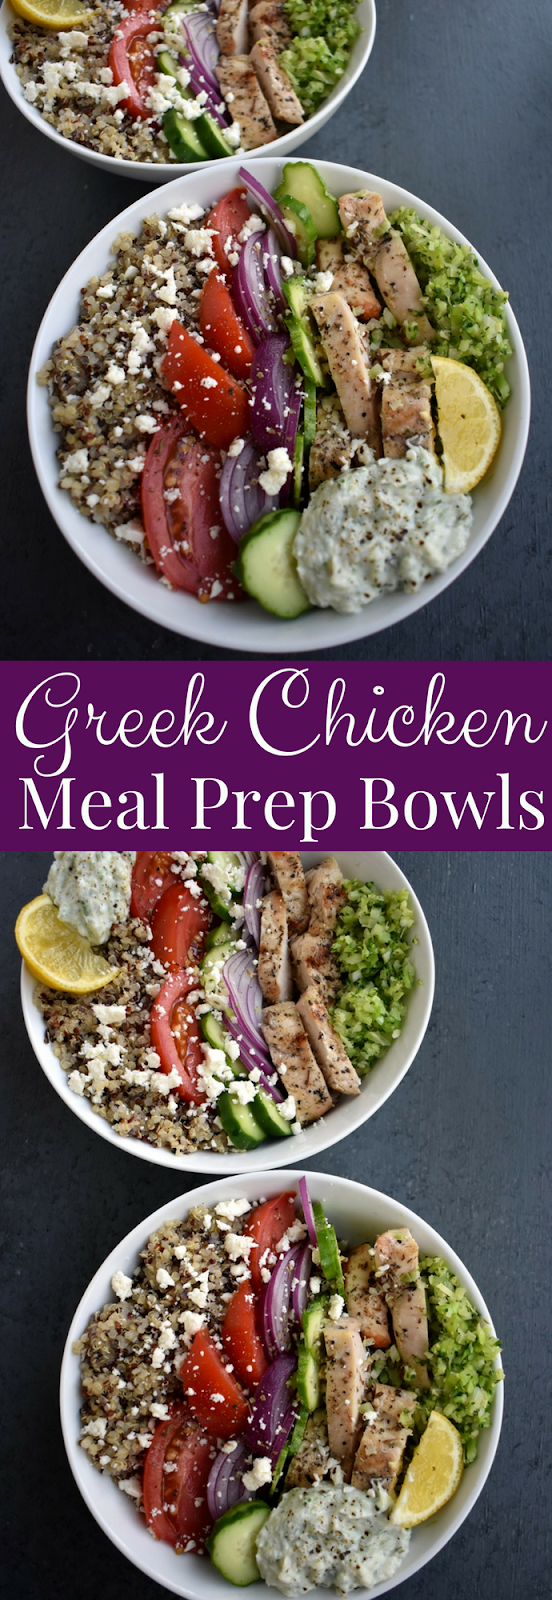 Greek Chicken Meal Prep Bowls are loaded with lemon herb chicken, tzatziki sauce, cucumbers, tomatoes, red onion, feta and broccoli for the perfect lunch that can be made ahead of time! www.nutritionistreviews.com